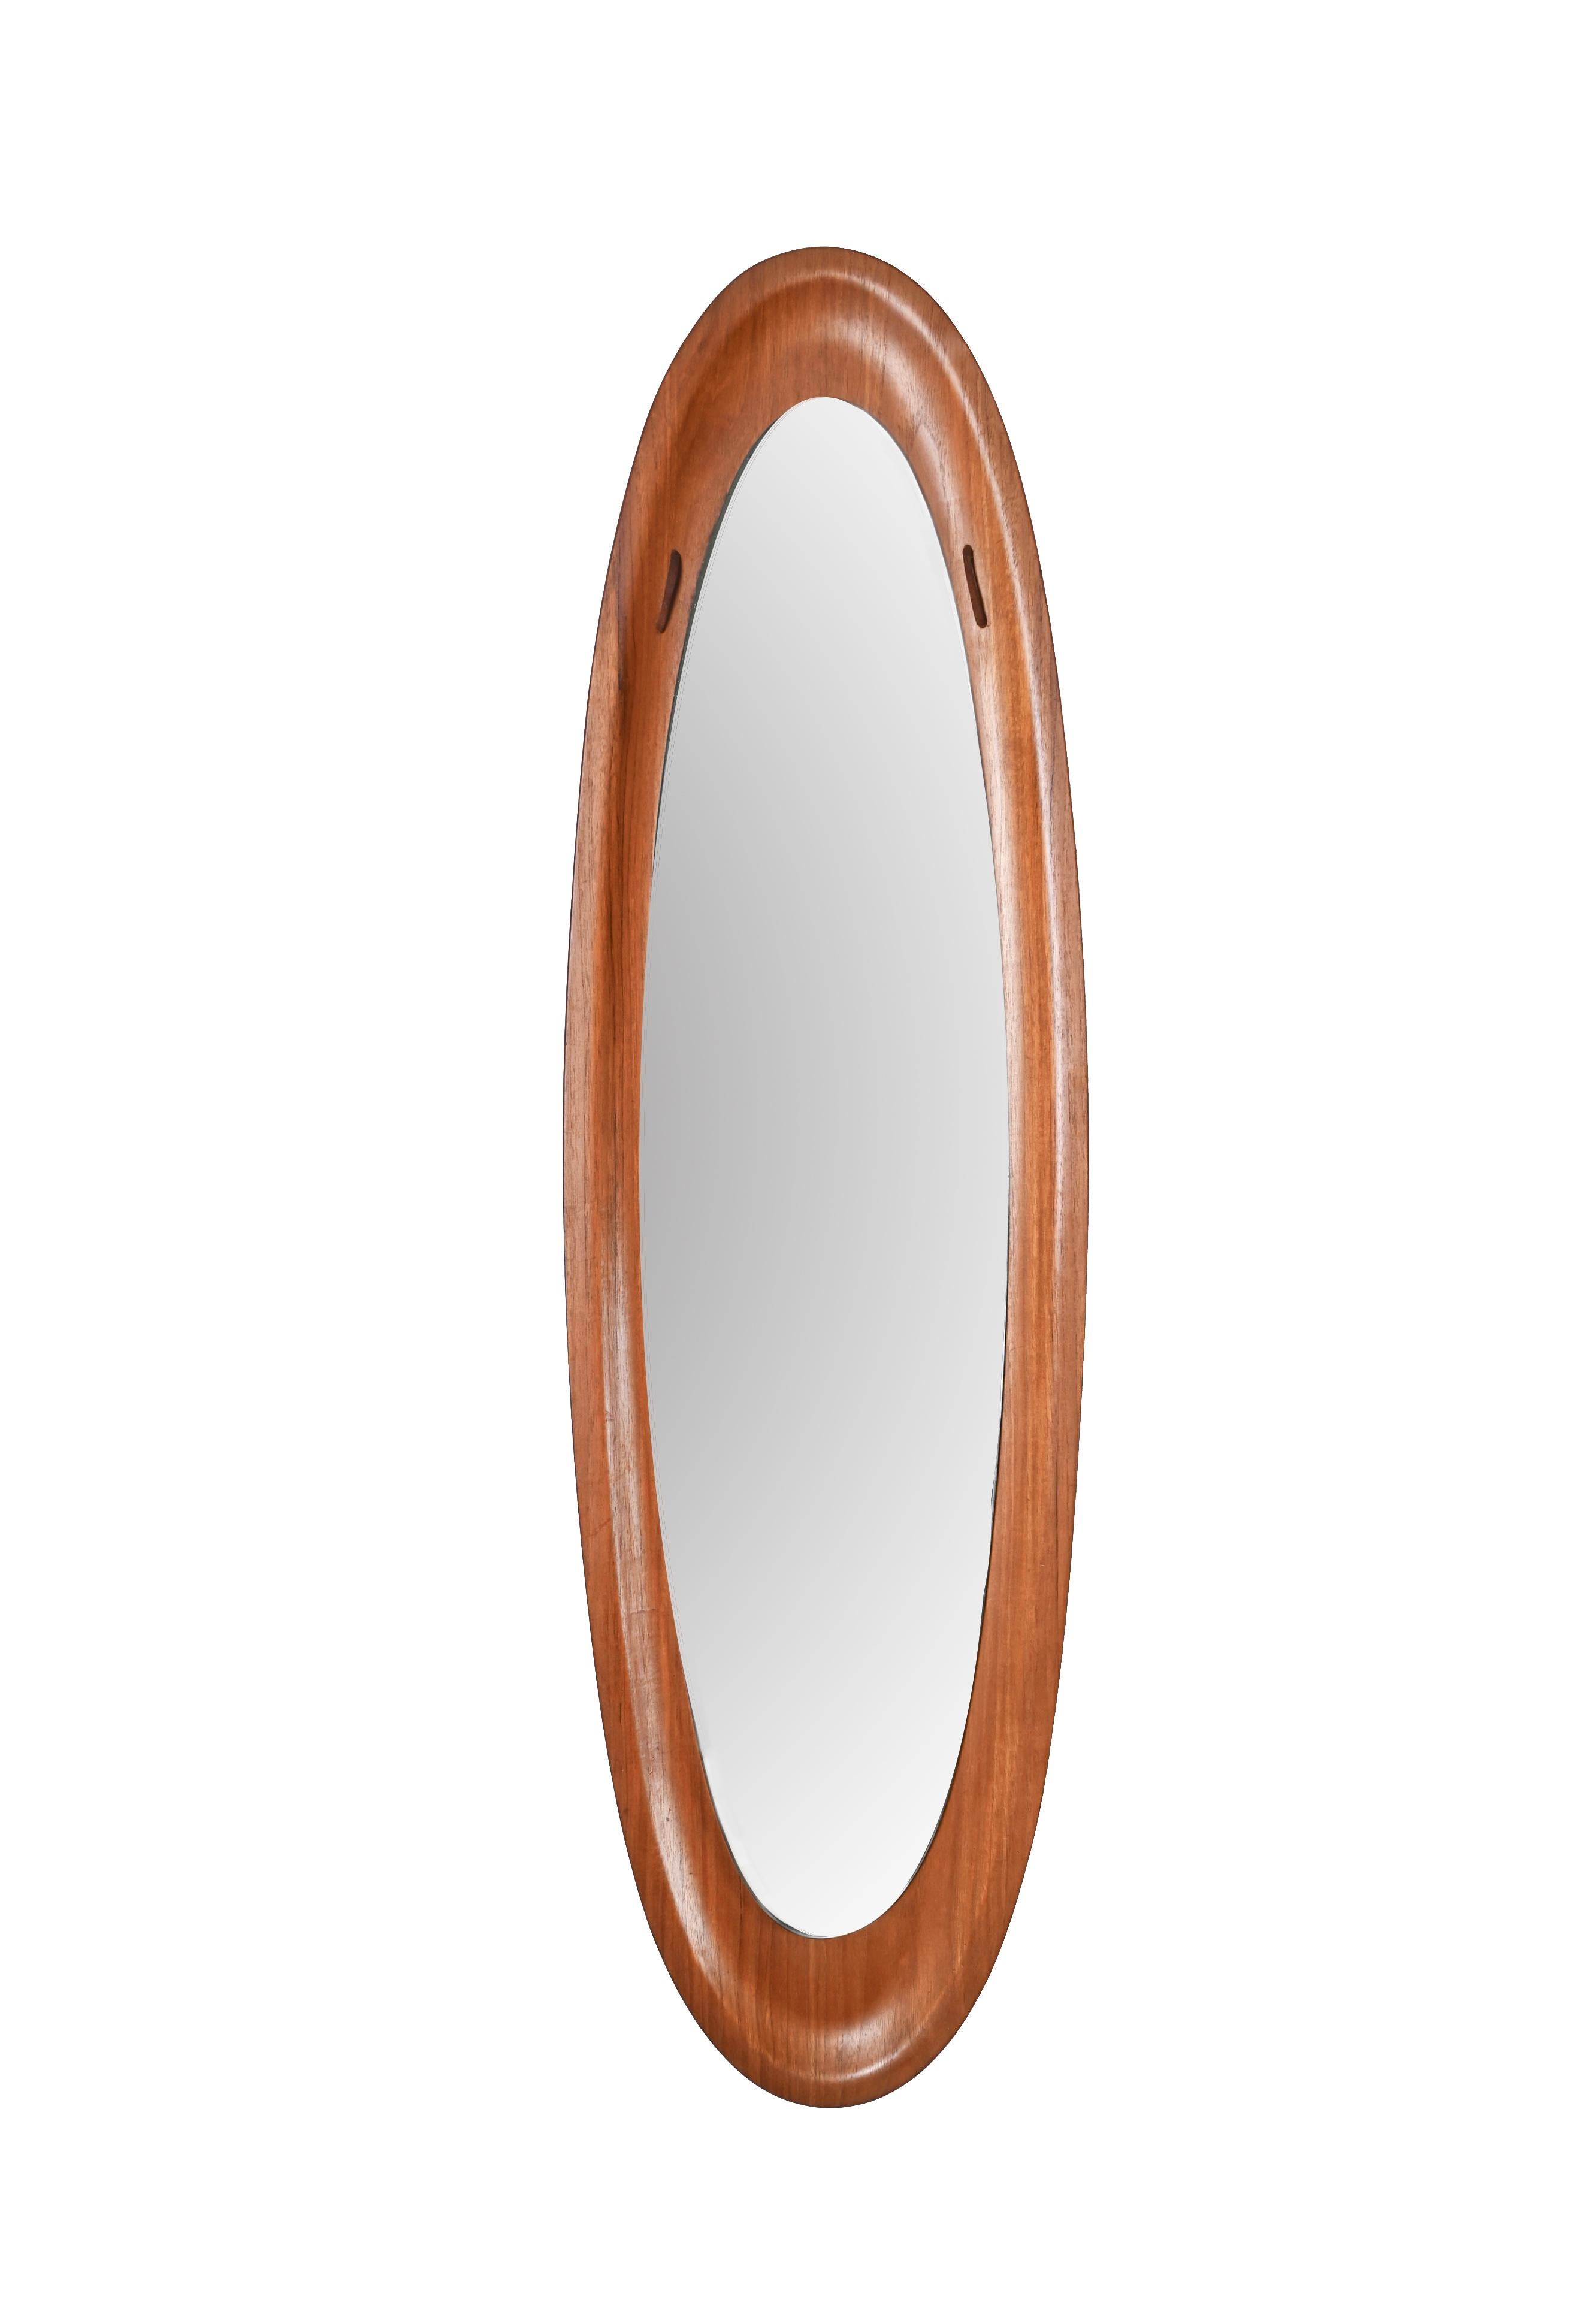 Amazing midcentury teak wood elliptical wall mirror. This fantastic piece was designed by Franco Campo and Carlo Graffi in Italy during the 1960s.

This wonderful piece features a curved teak wood frame with beautiful wood grains that holds an